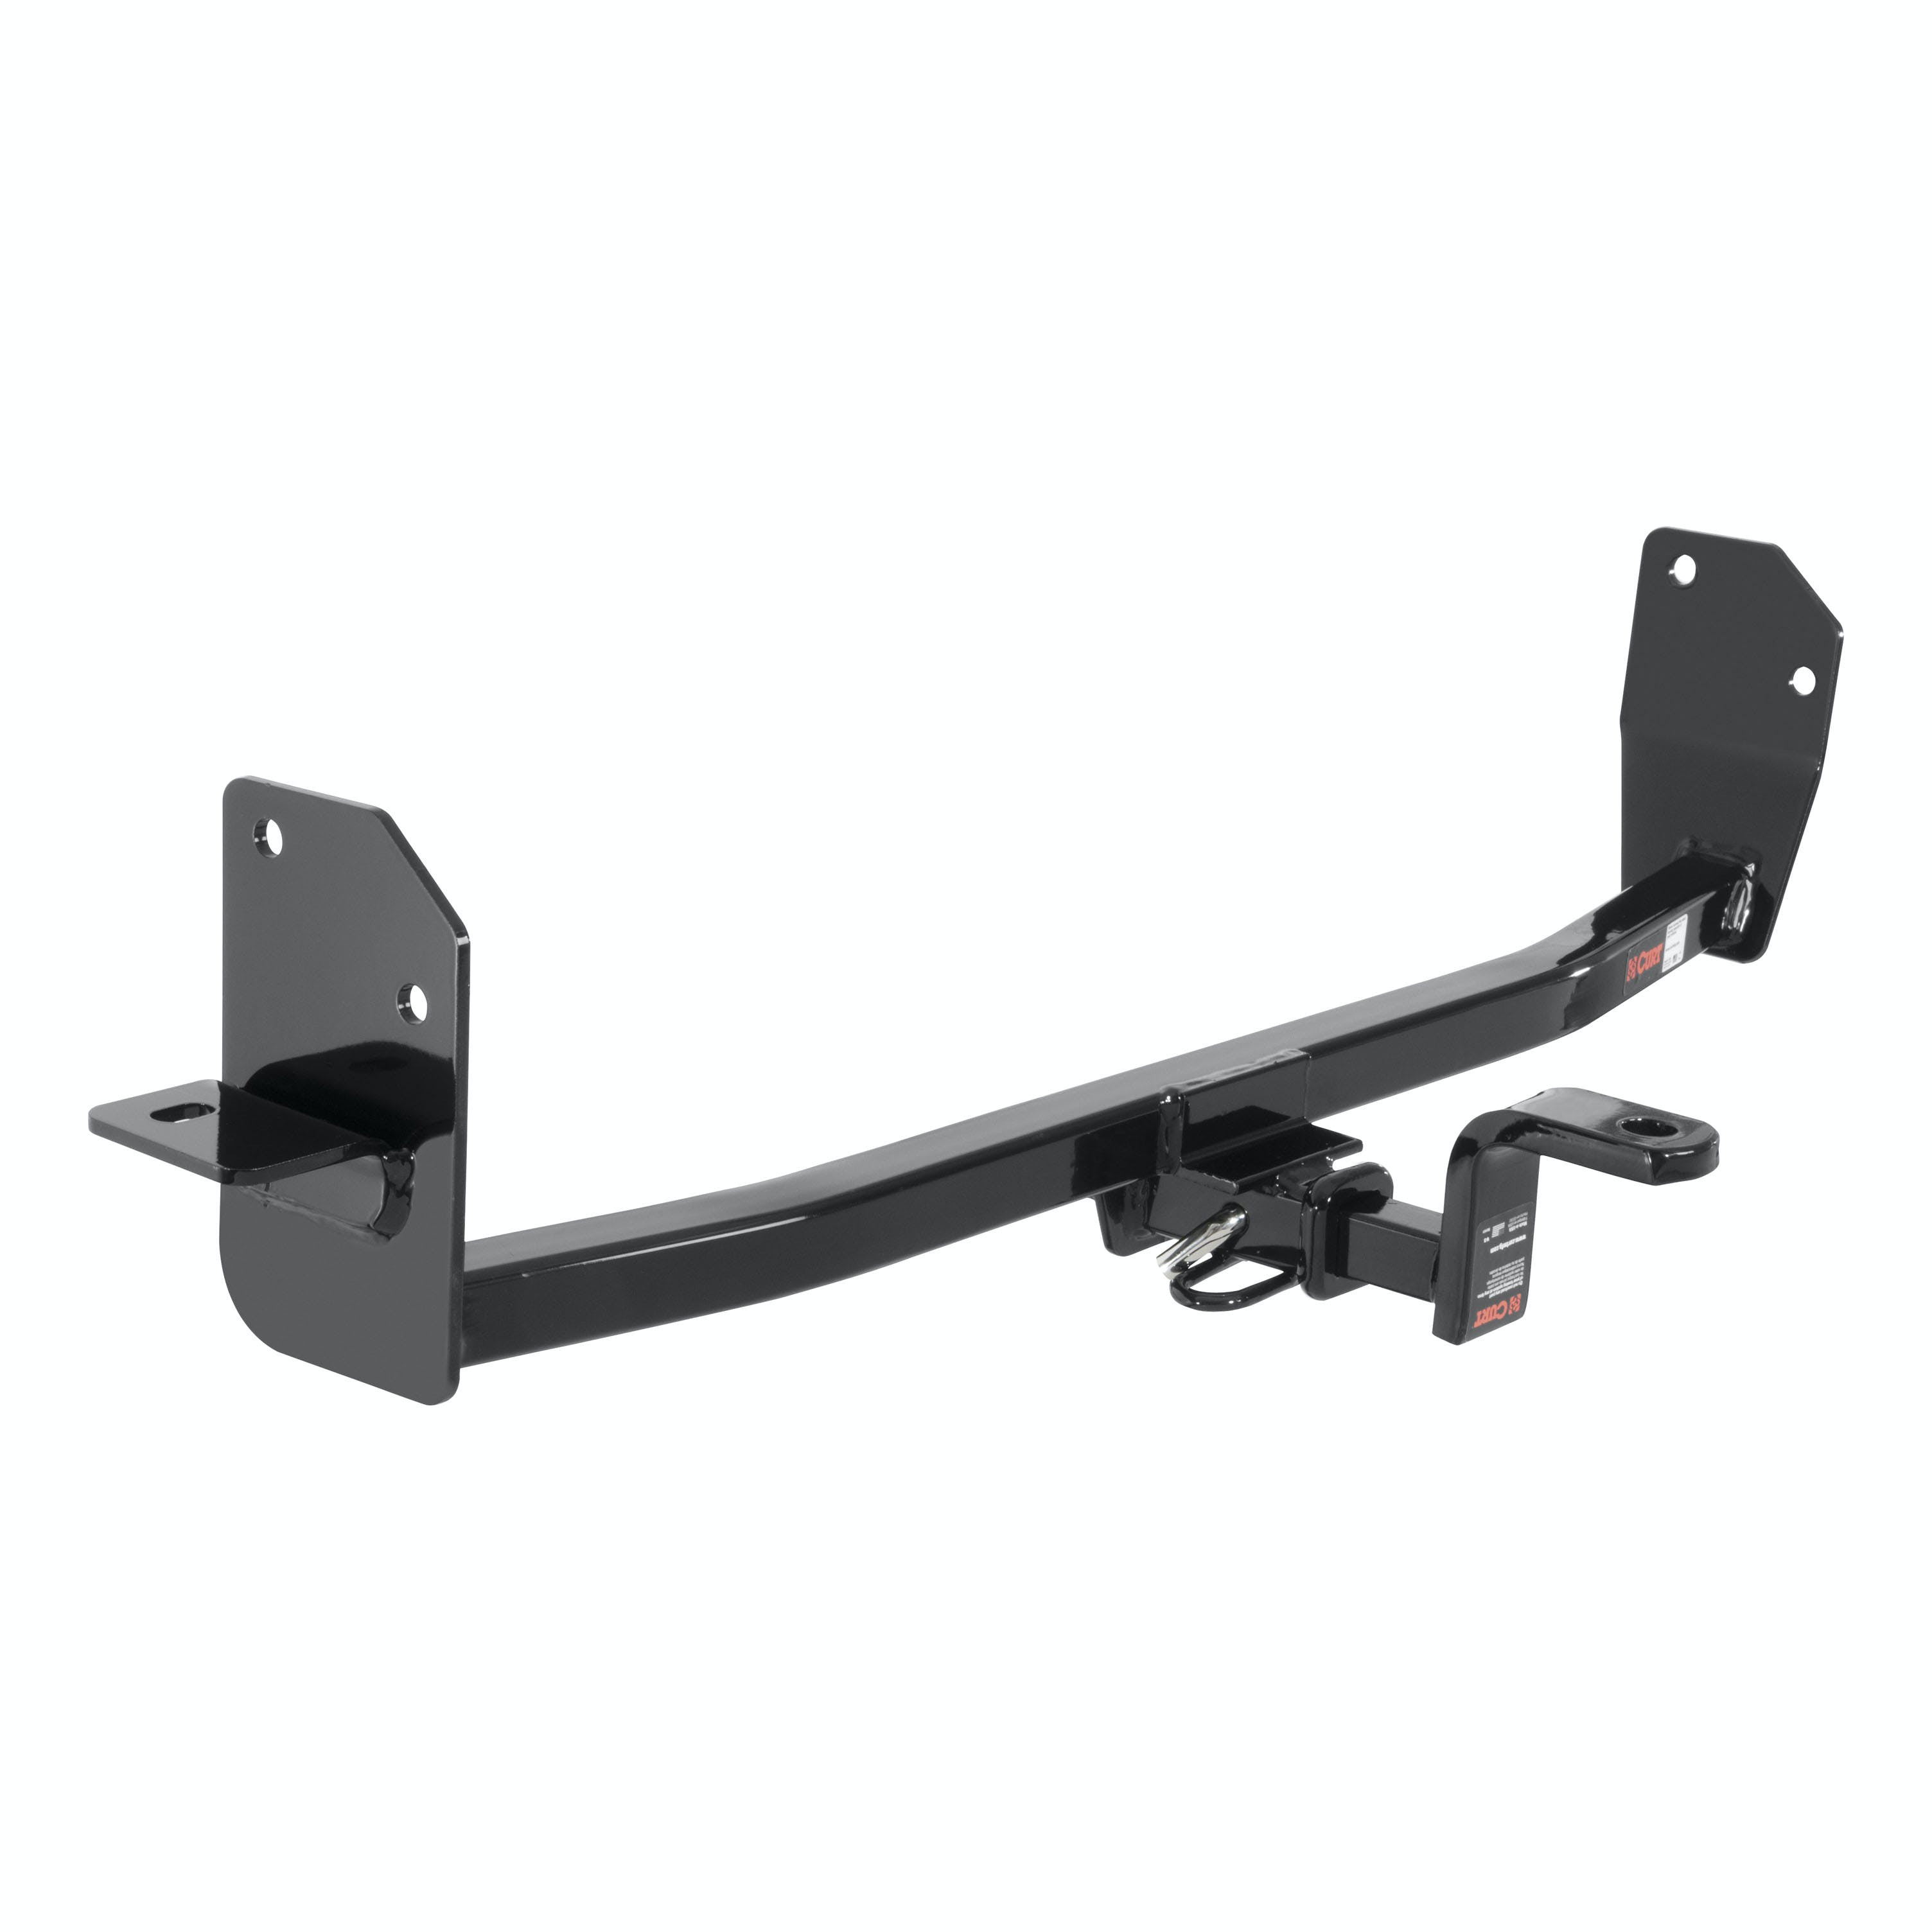 CURT 113123 Class 1 Trailer Hitch, 1-1/4 Ball Mount, Select Ford Mustang